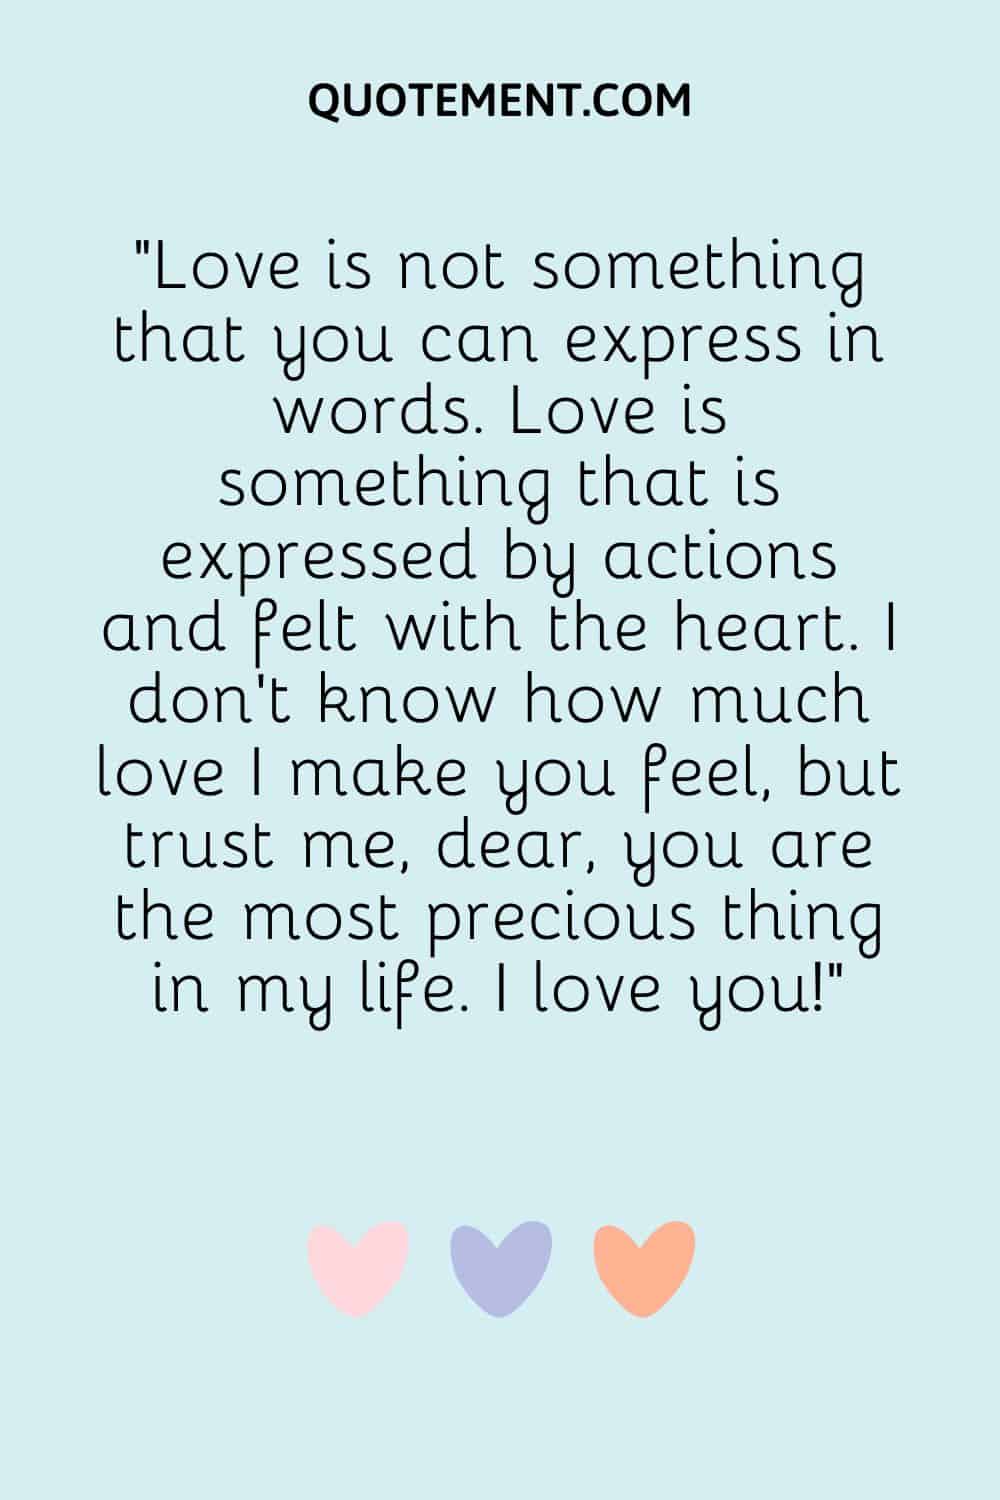 Love is not something that you can express in words